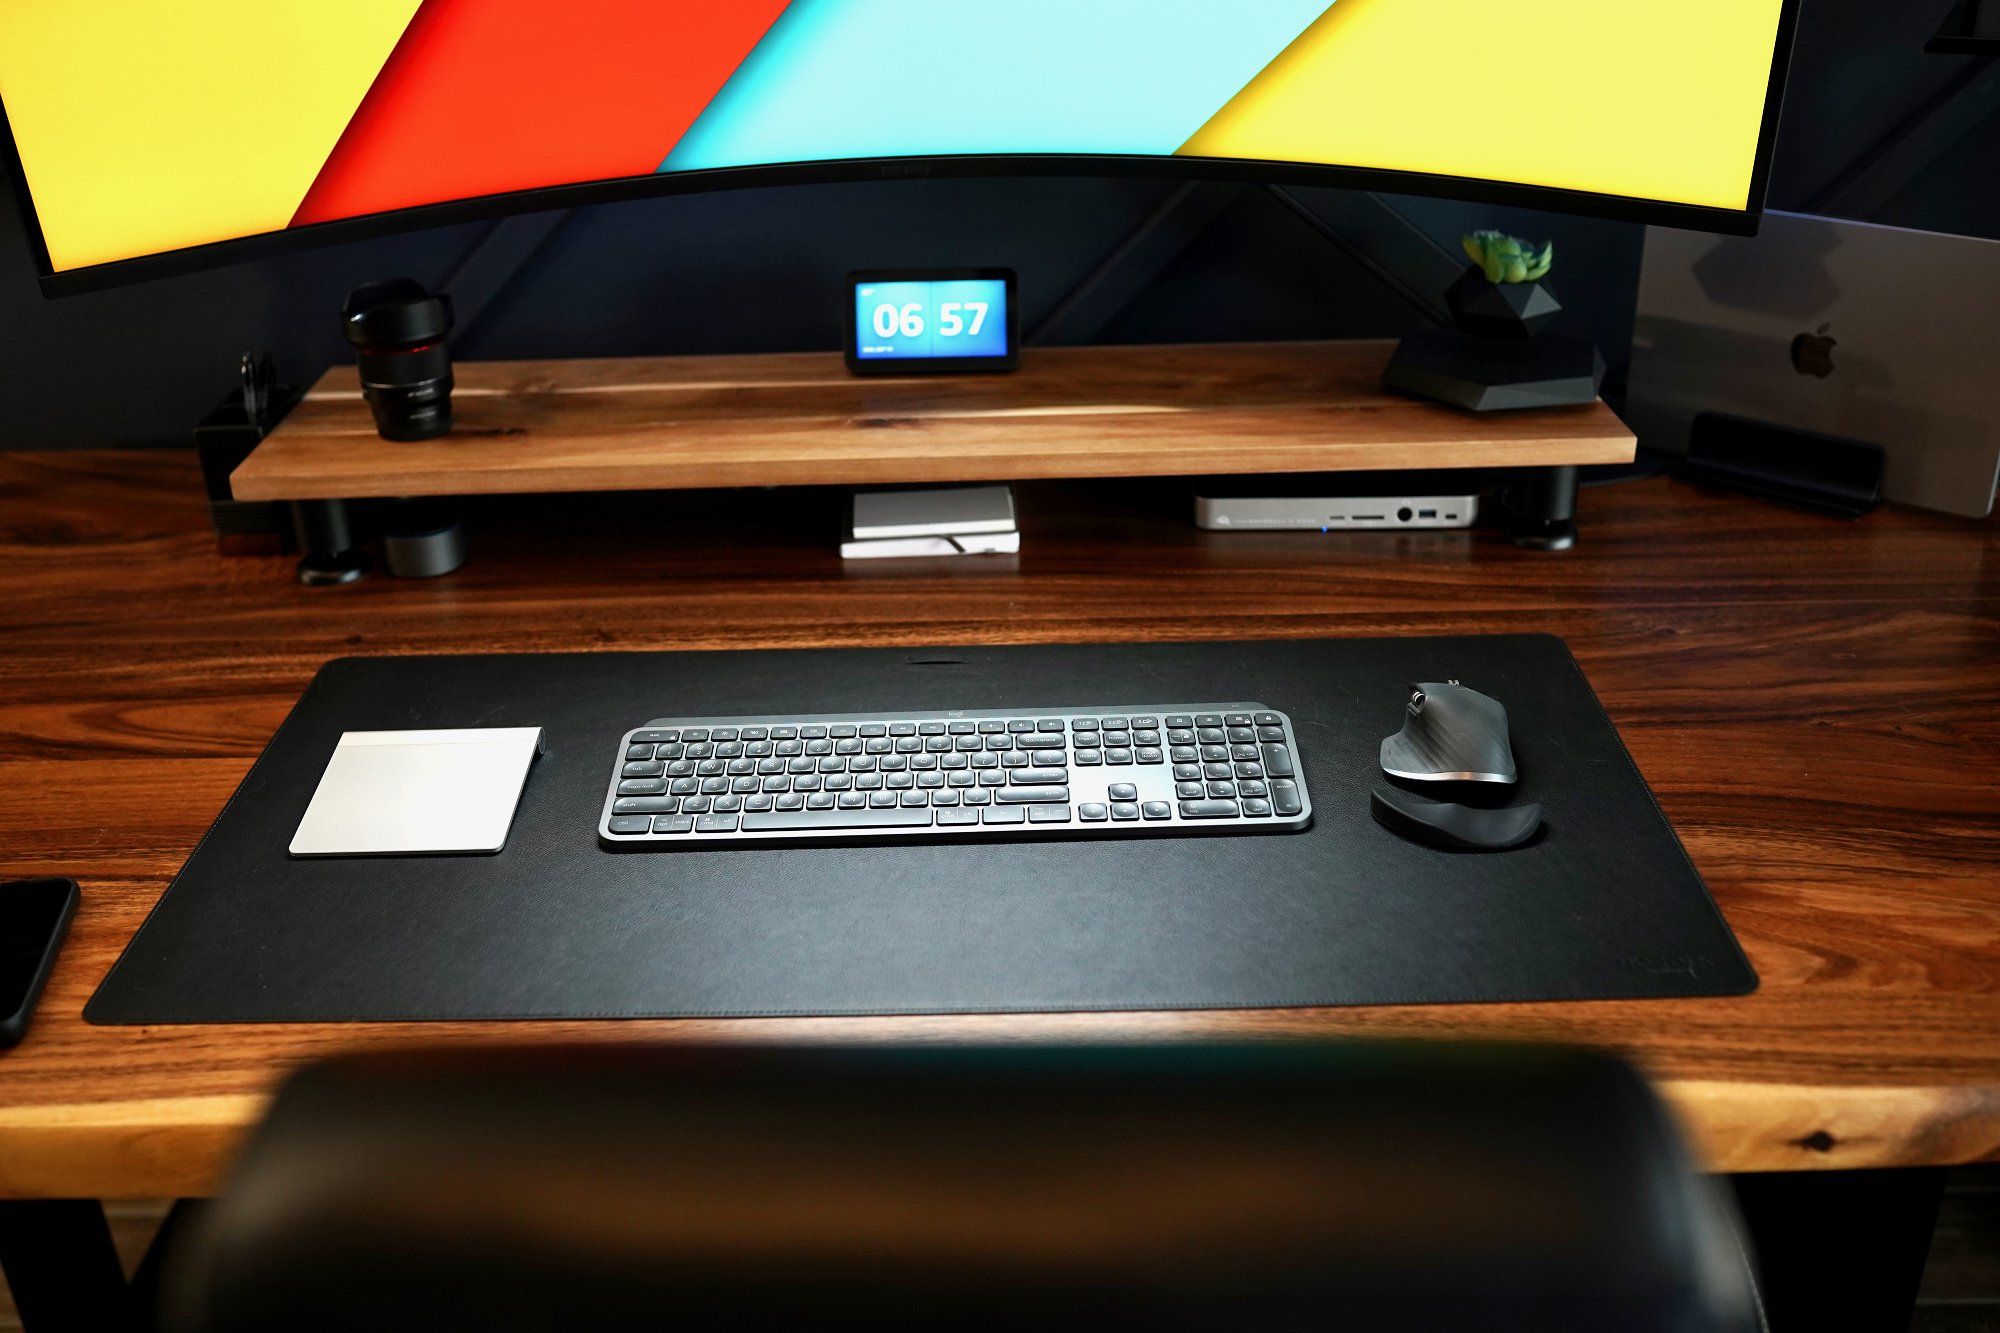 An Apple Magic Trackpad, a Logitech MX keyboard, and a Logitech MX Master 3 mouse lying on the desk mat in a home office